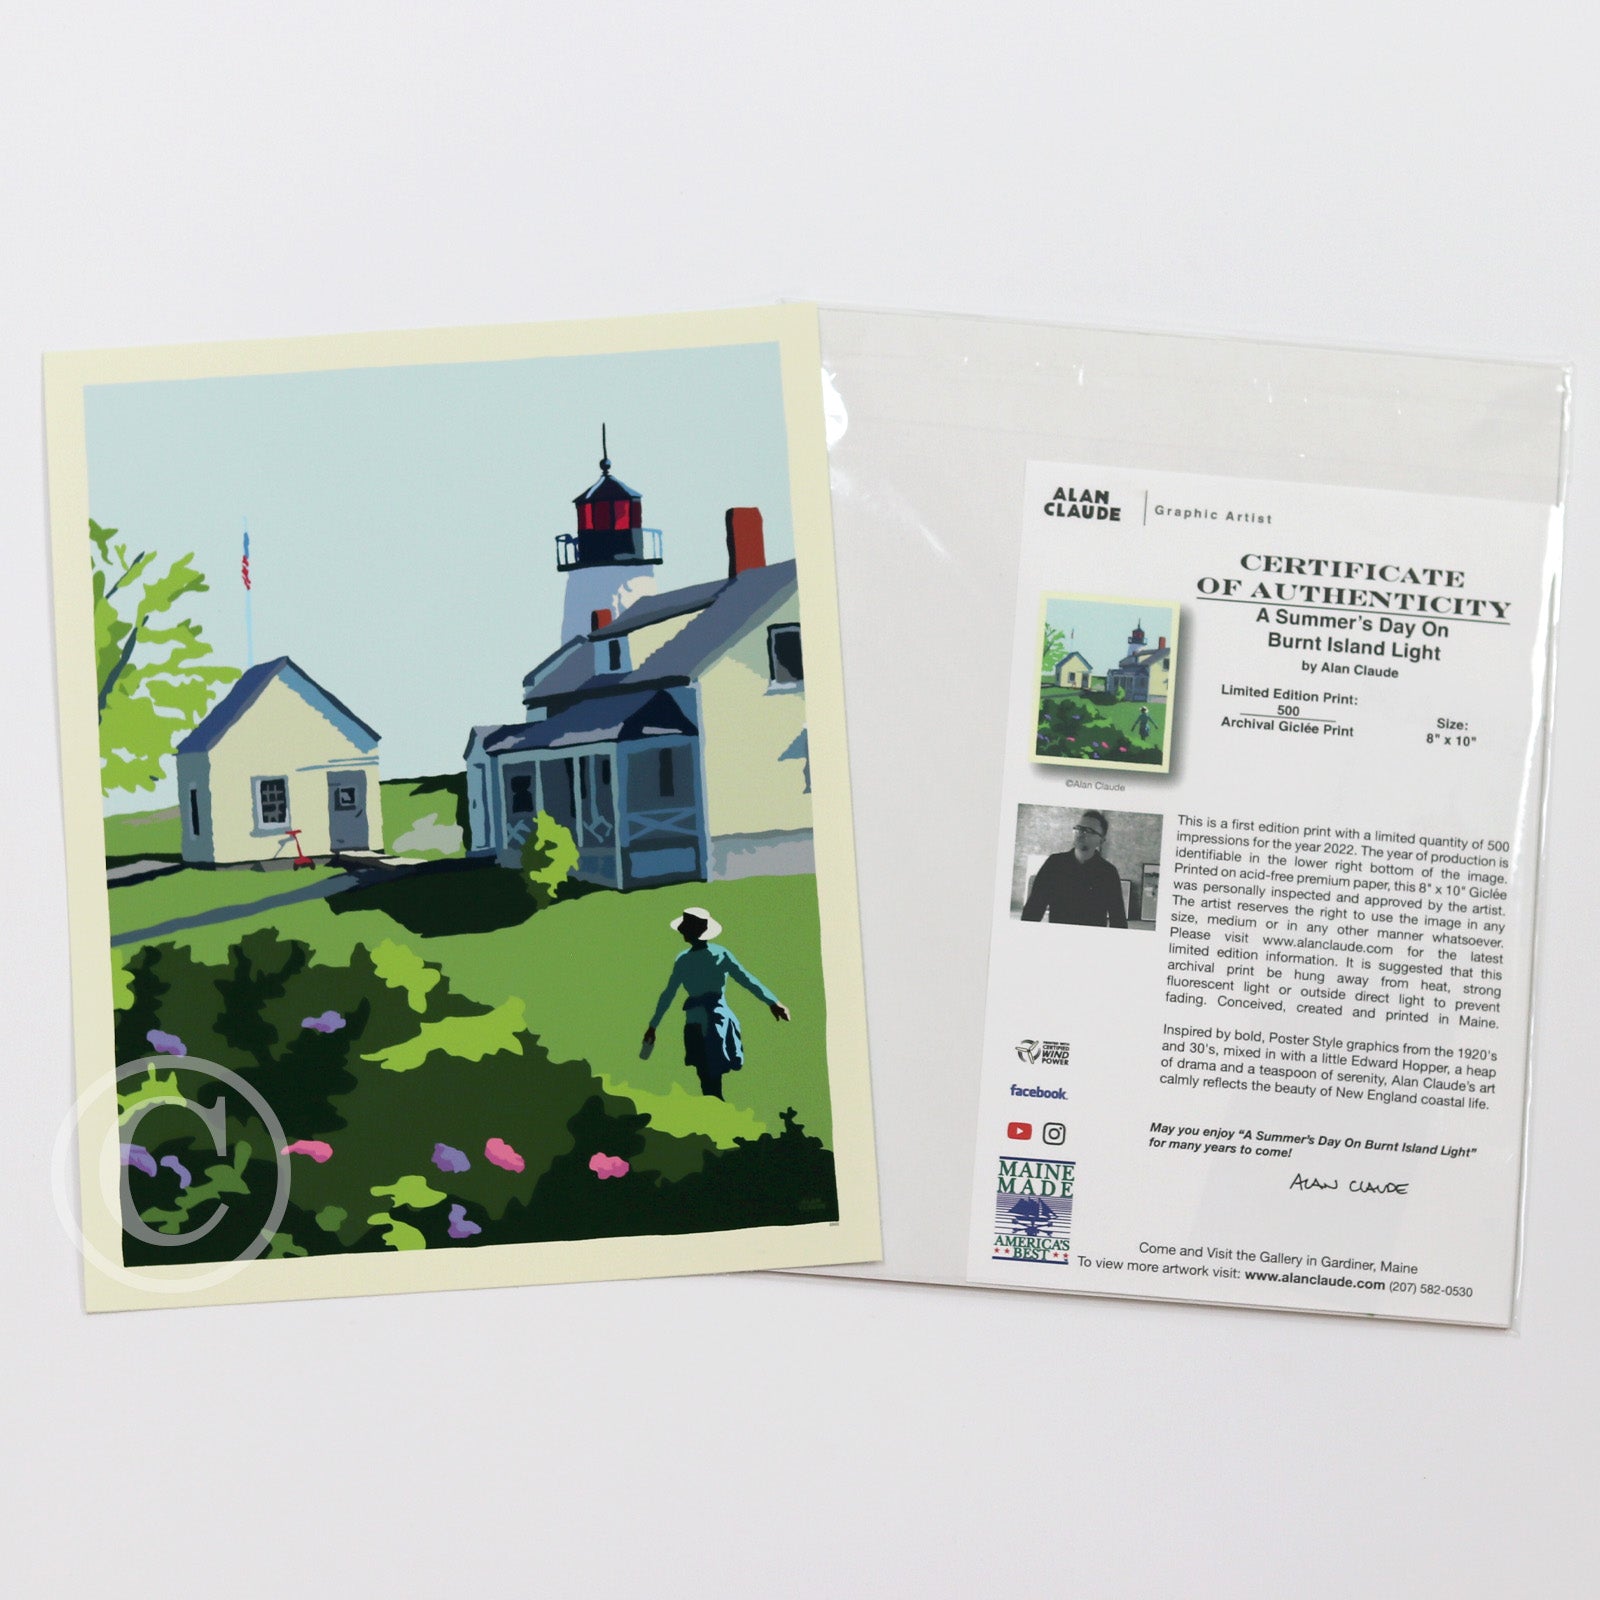 A Summer's Day on Burnt Island Light Art Print 8" x 10" Travel Poster By Alan Claude - Maine